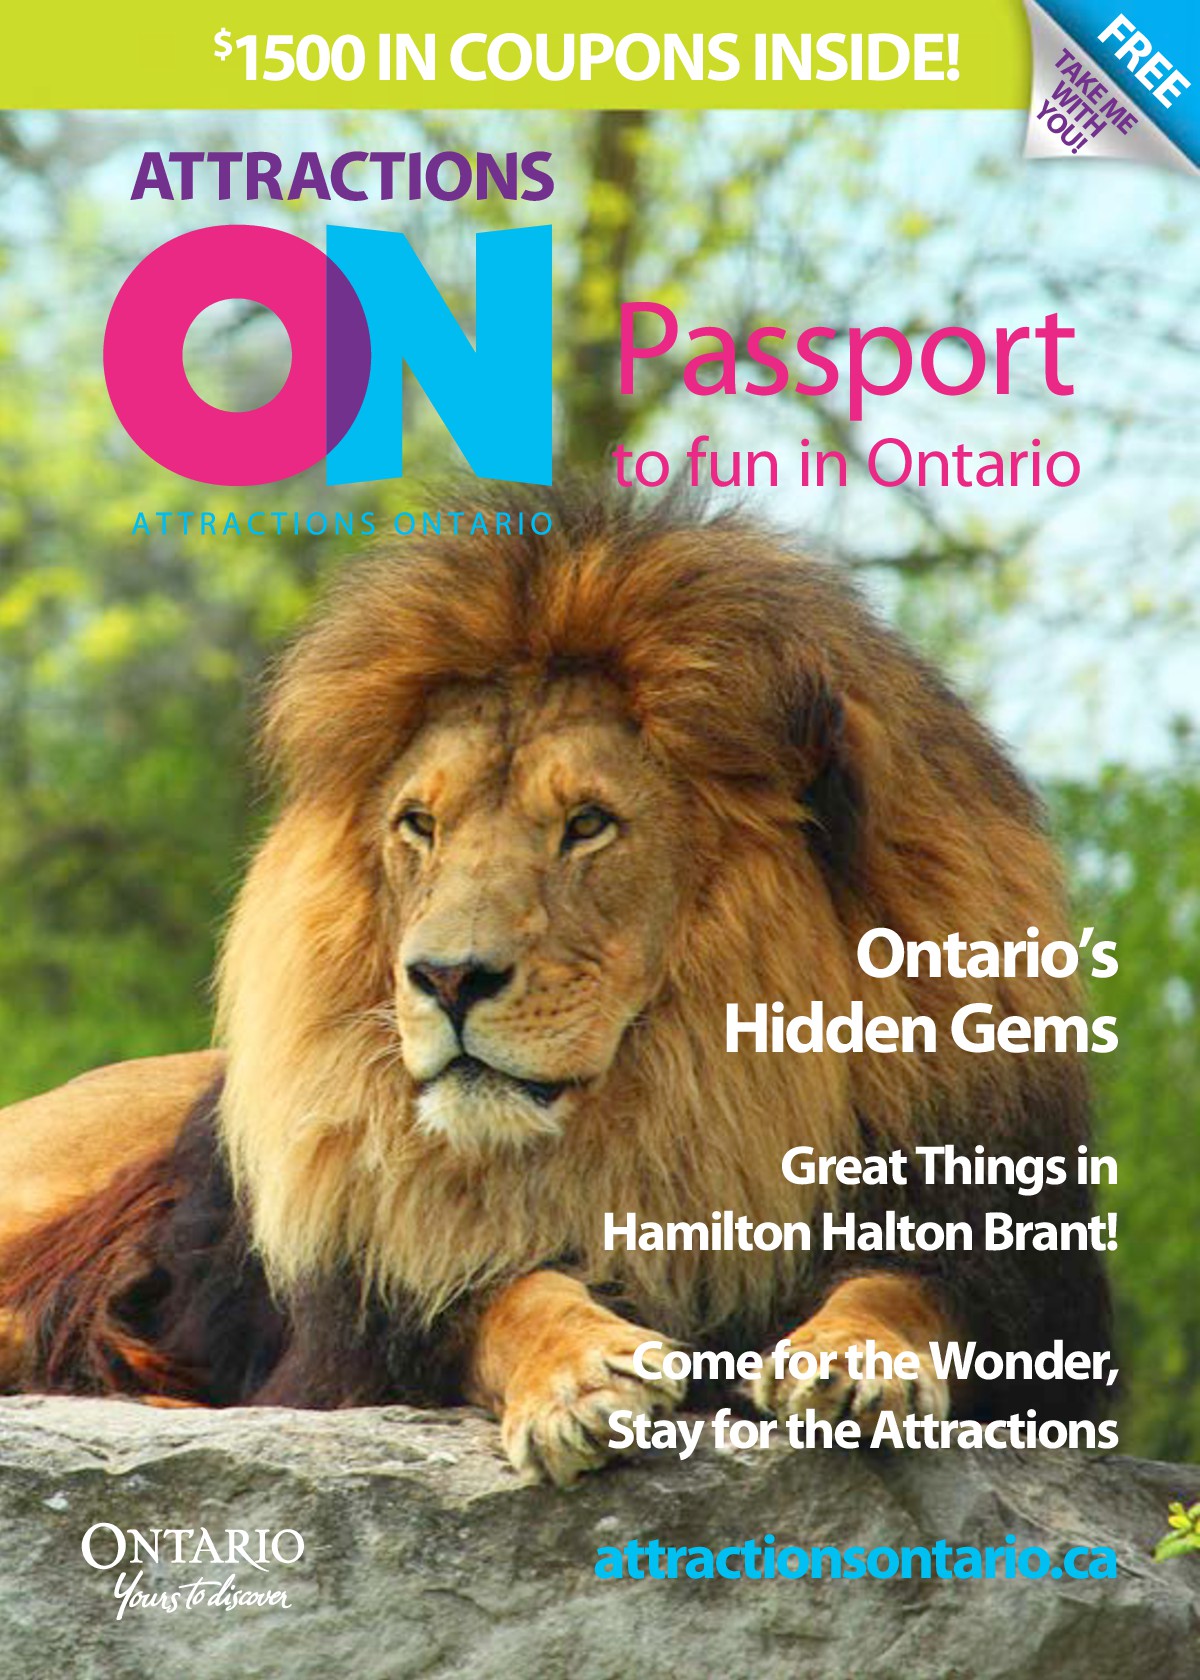 Passport Magazine and Coupon Book Attractions Ontario